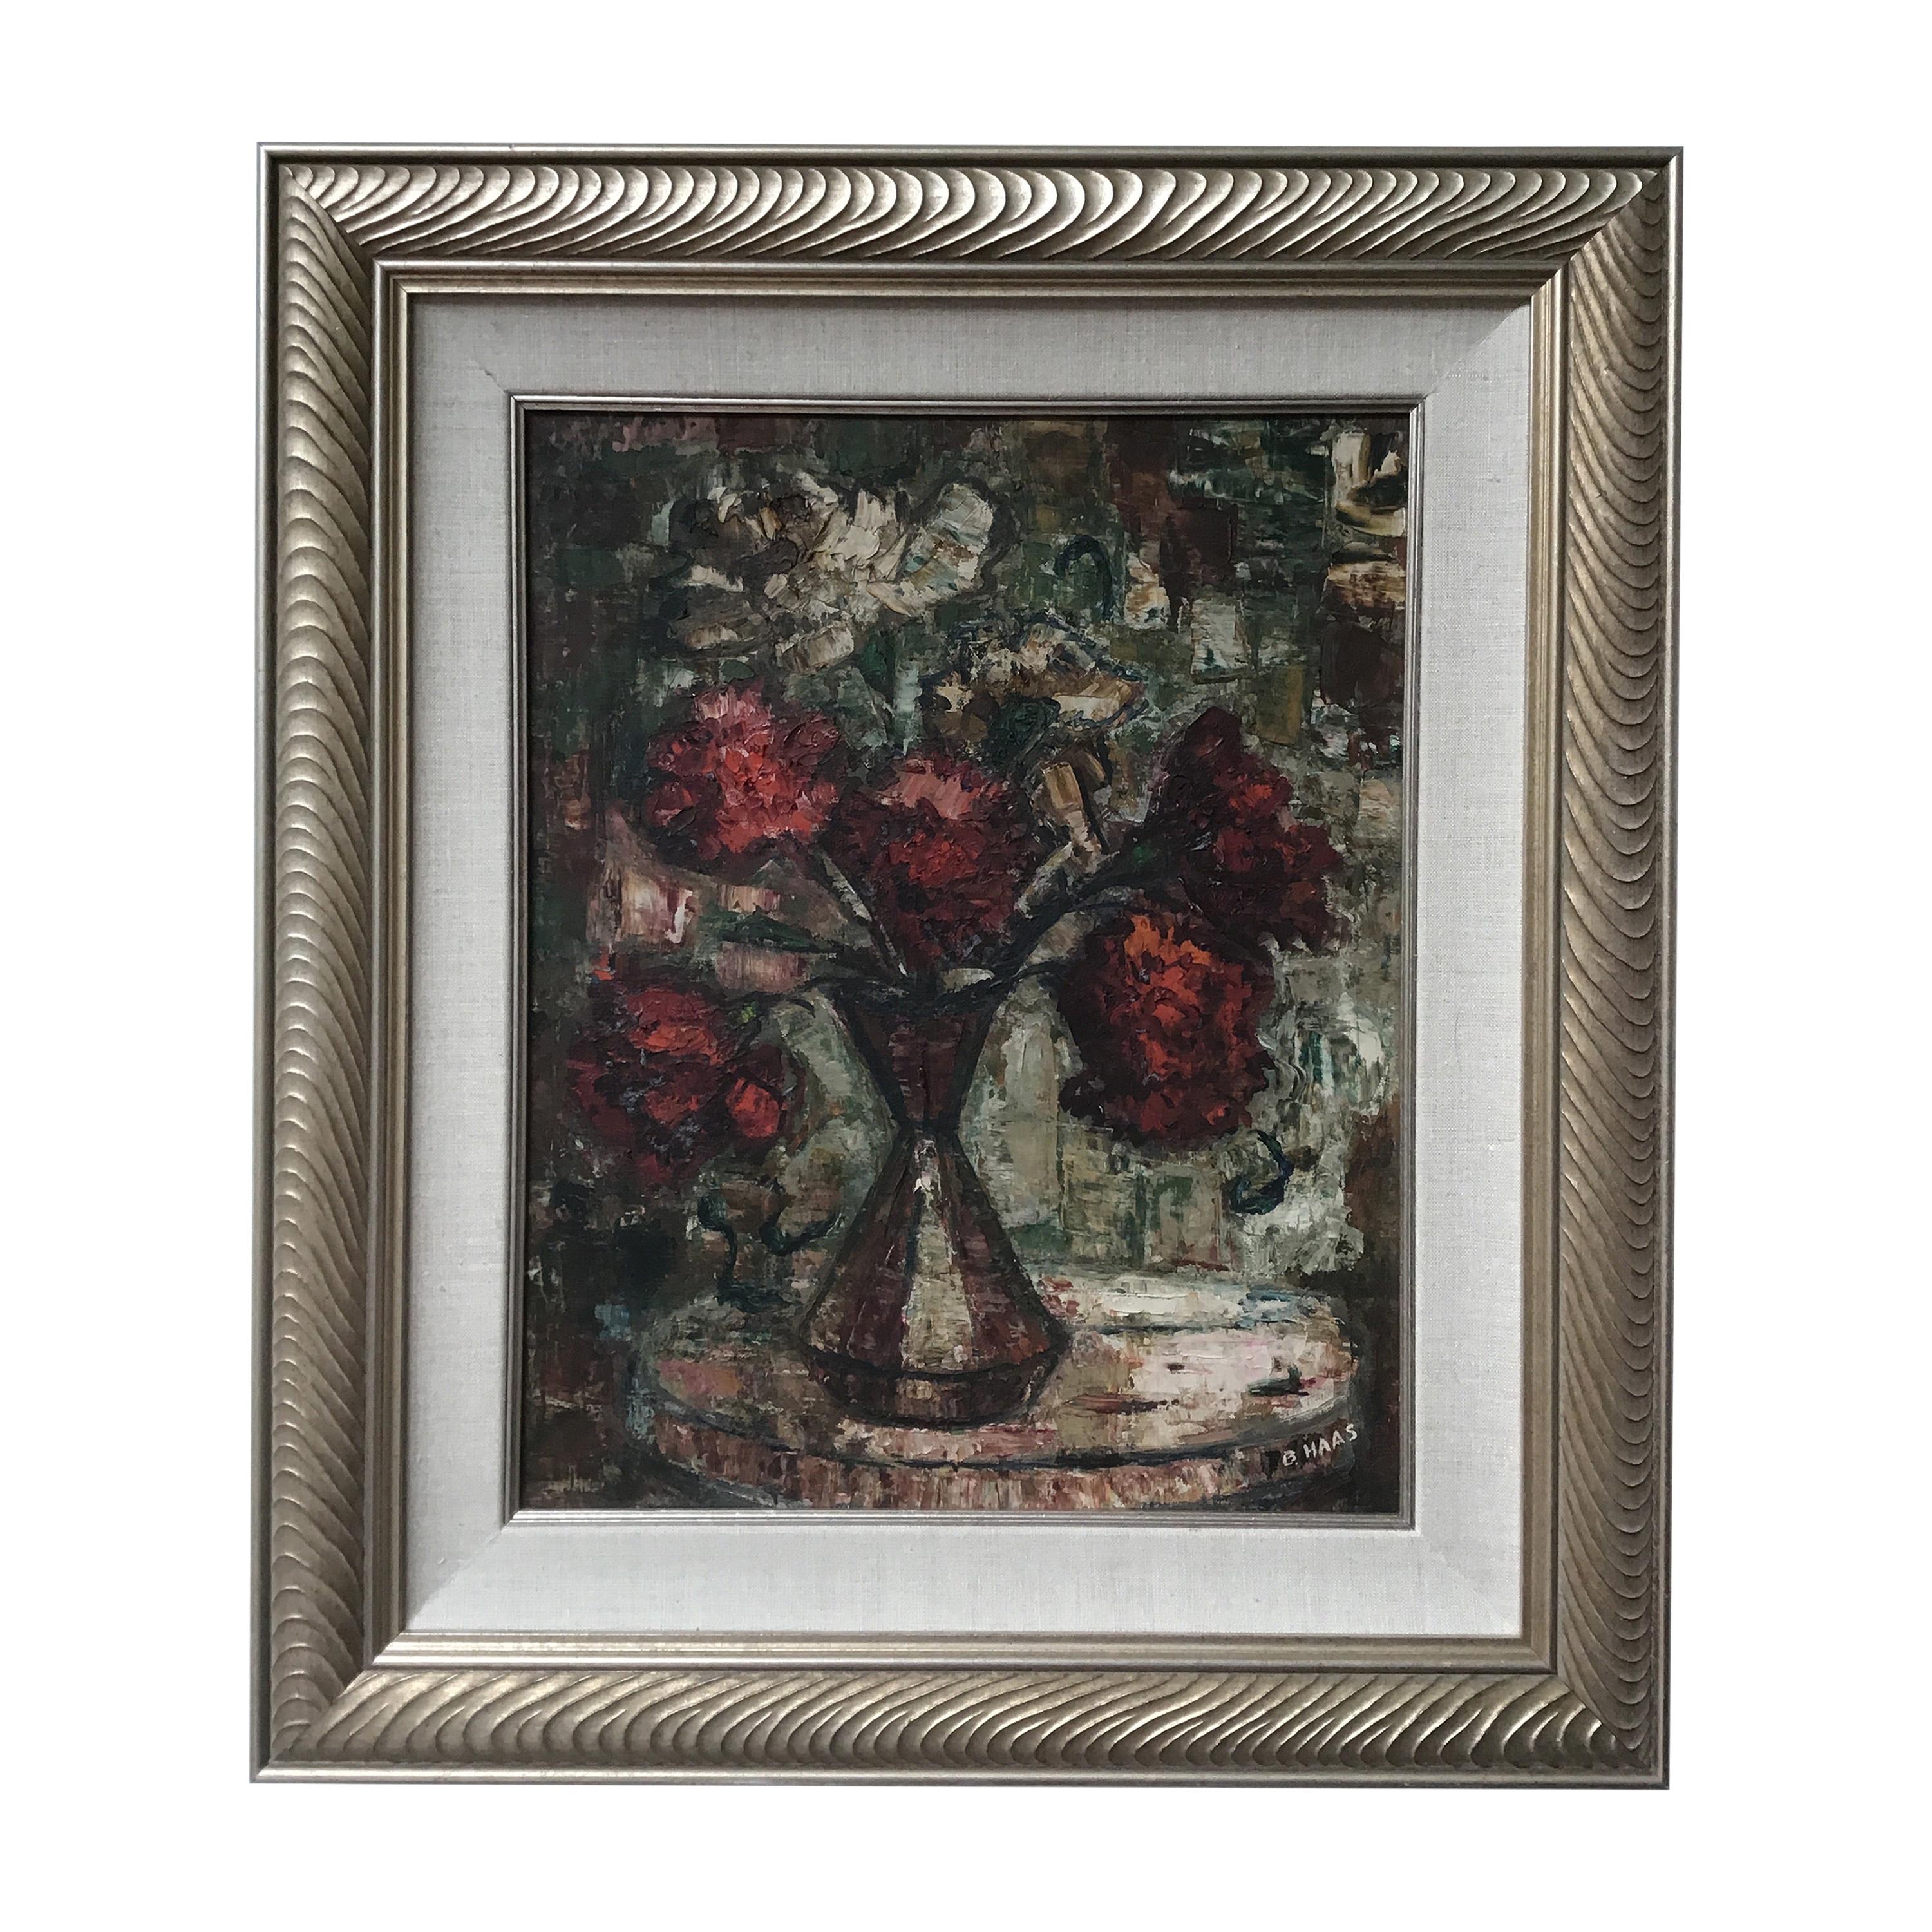 1990s Oil on Canvas of Floral Arrangement by B. Haas For Sale